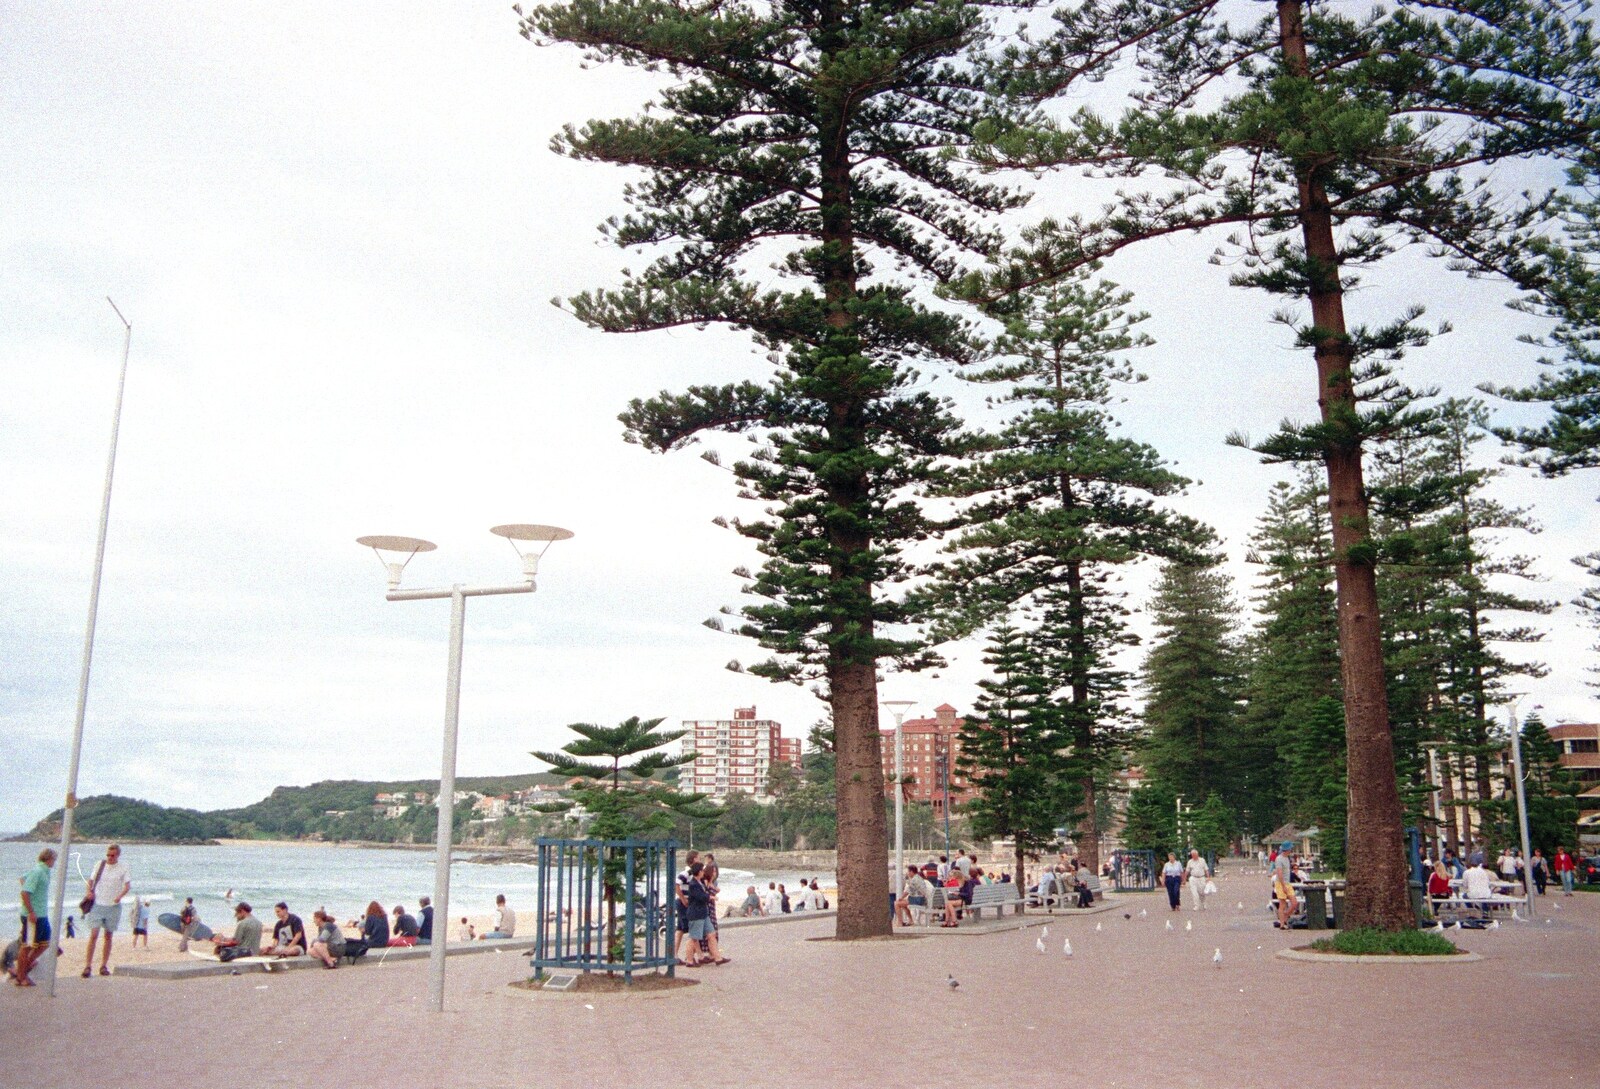 Manly seafront from A Trip to the Zoo, Sydney, Australia - 7th April 2000